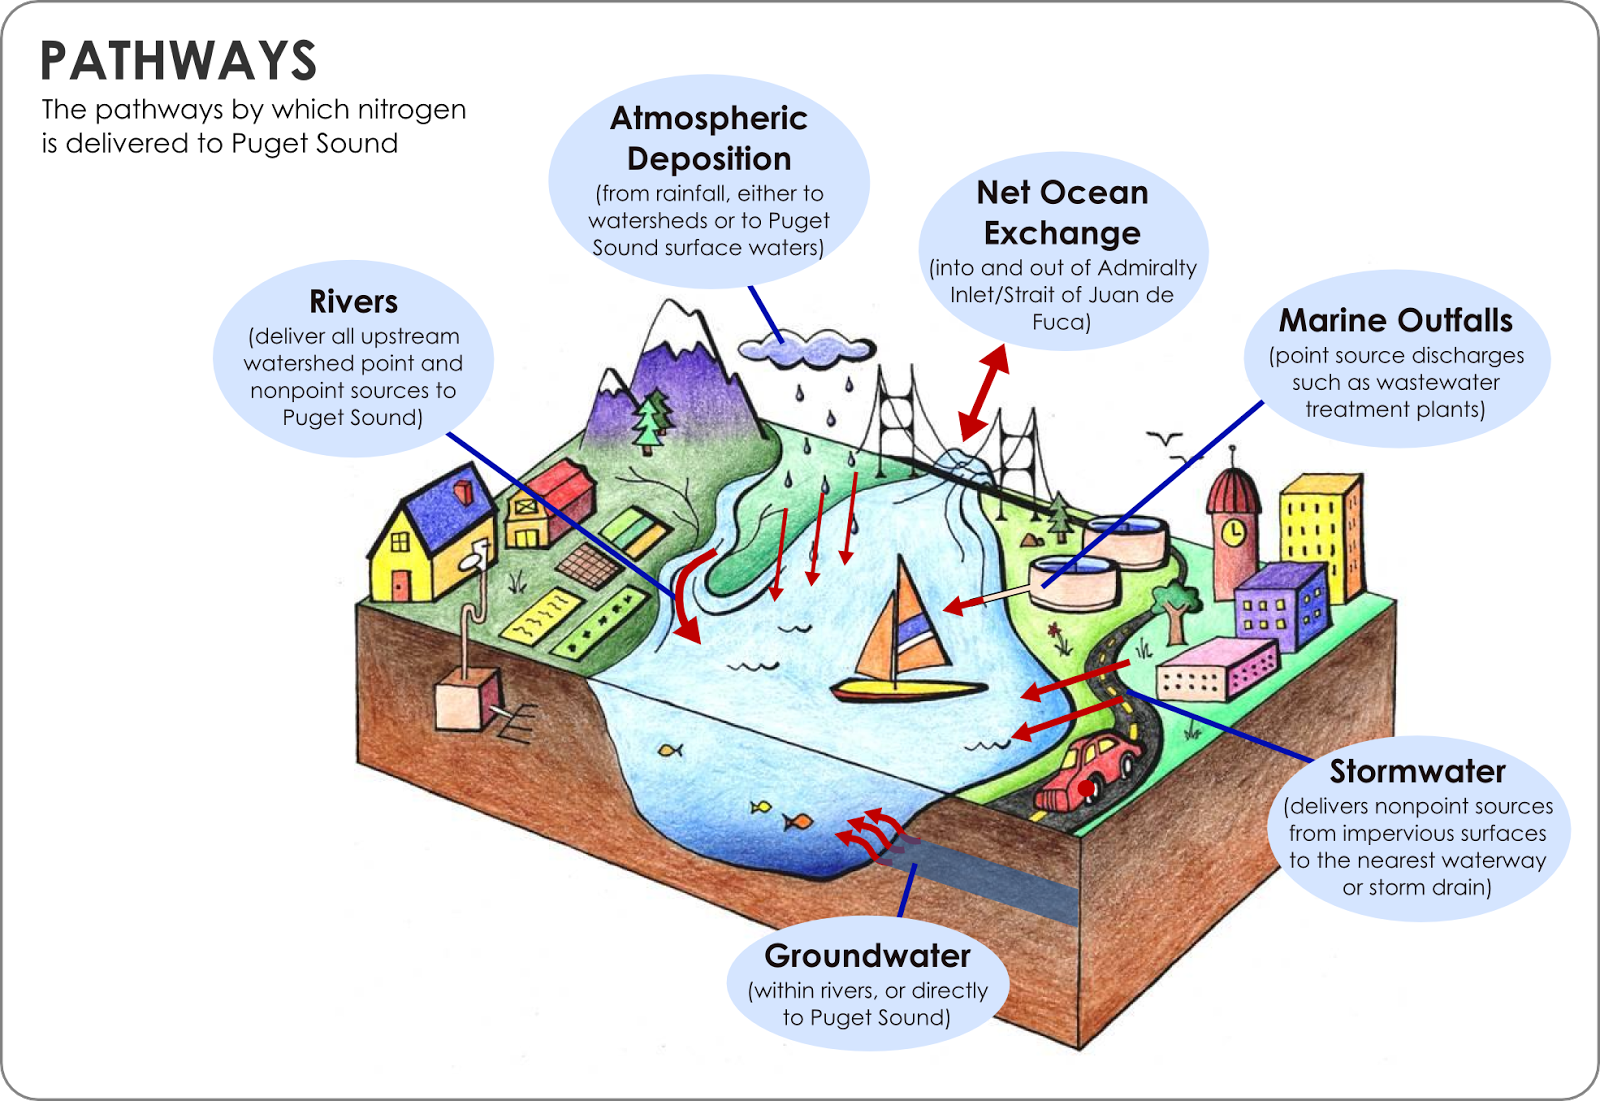 Pathways to the Sound: Rivers, Atmospheric deposition, net ocean exchange, marine outfalls, stormwater, and groundwater. 